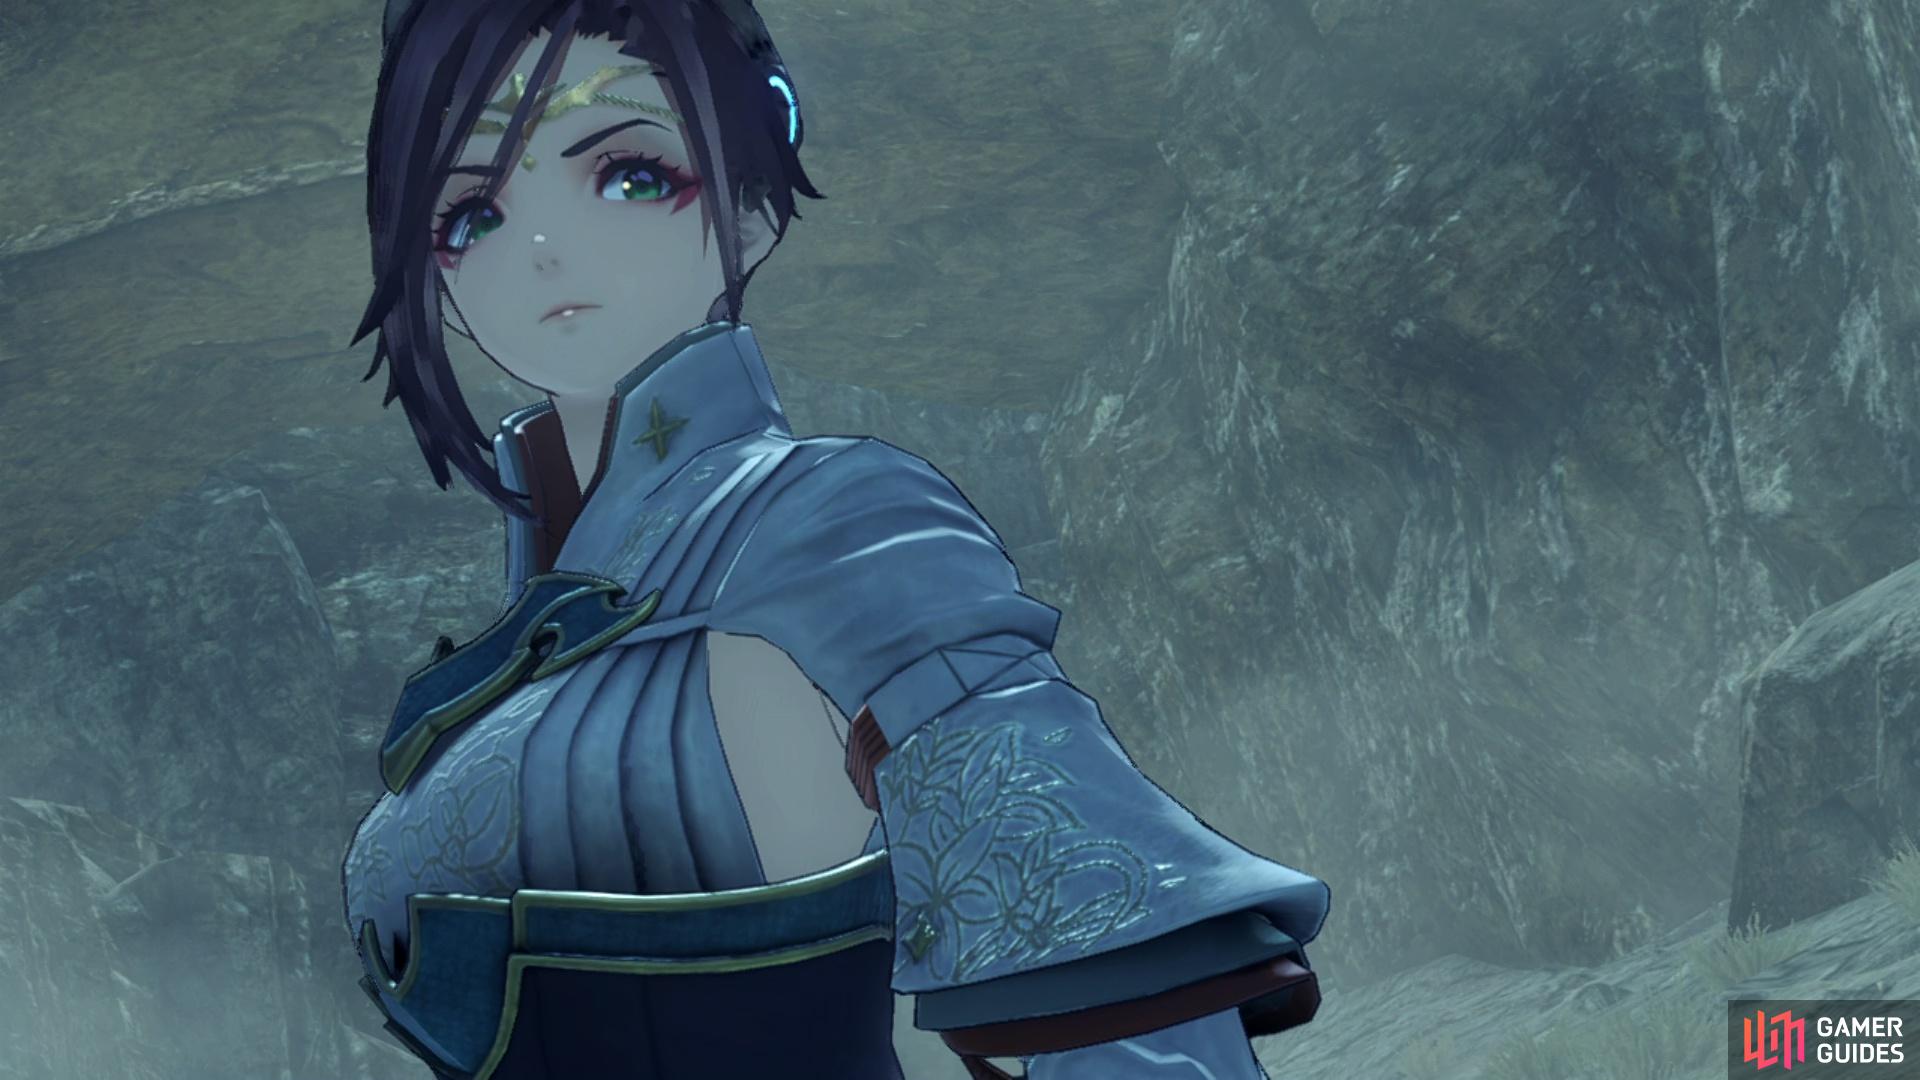 Her Reasons is Alexandria’s Hero Quest in Xenoblade Chronicles 3.